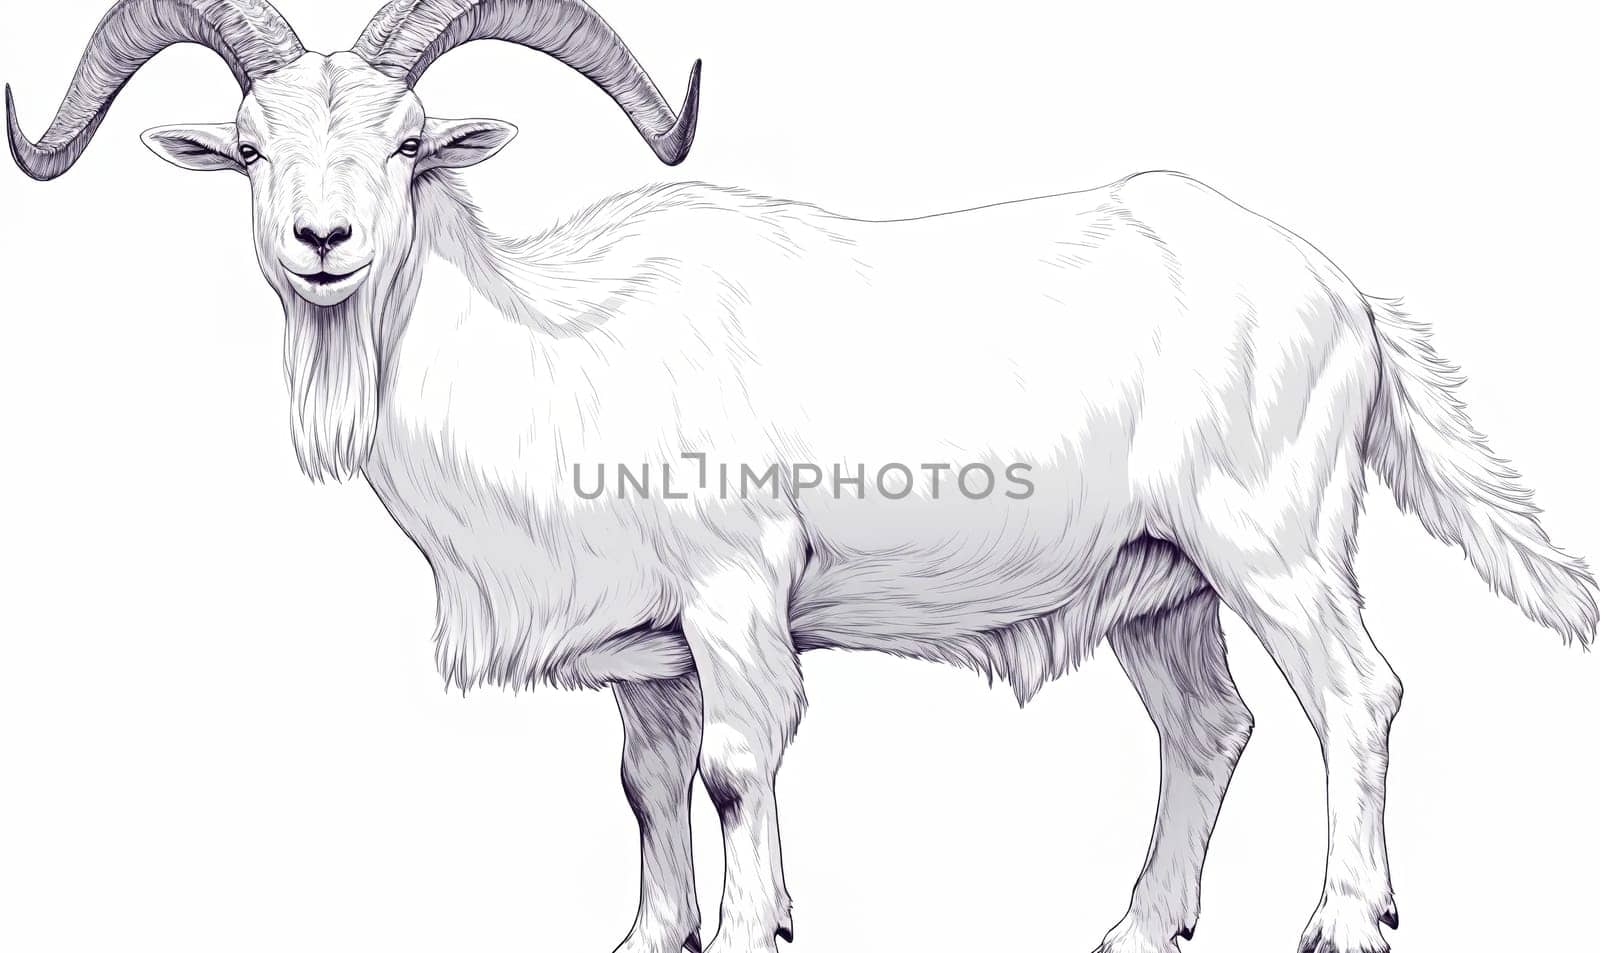 Coloring book for children, coloring animal, goat. Selective soft focus.